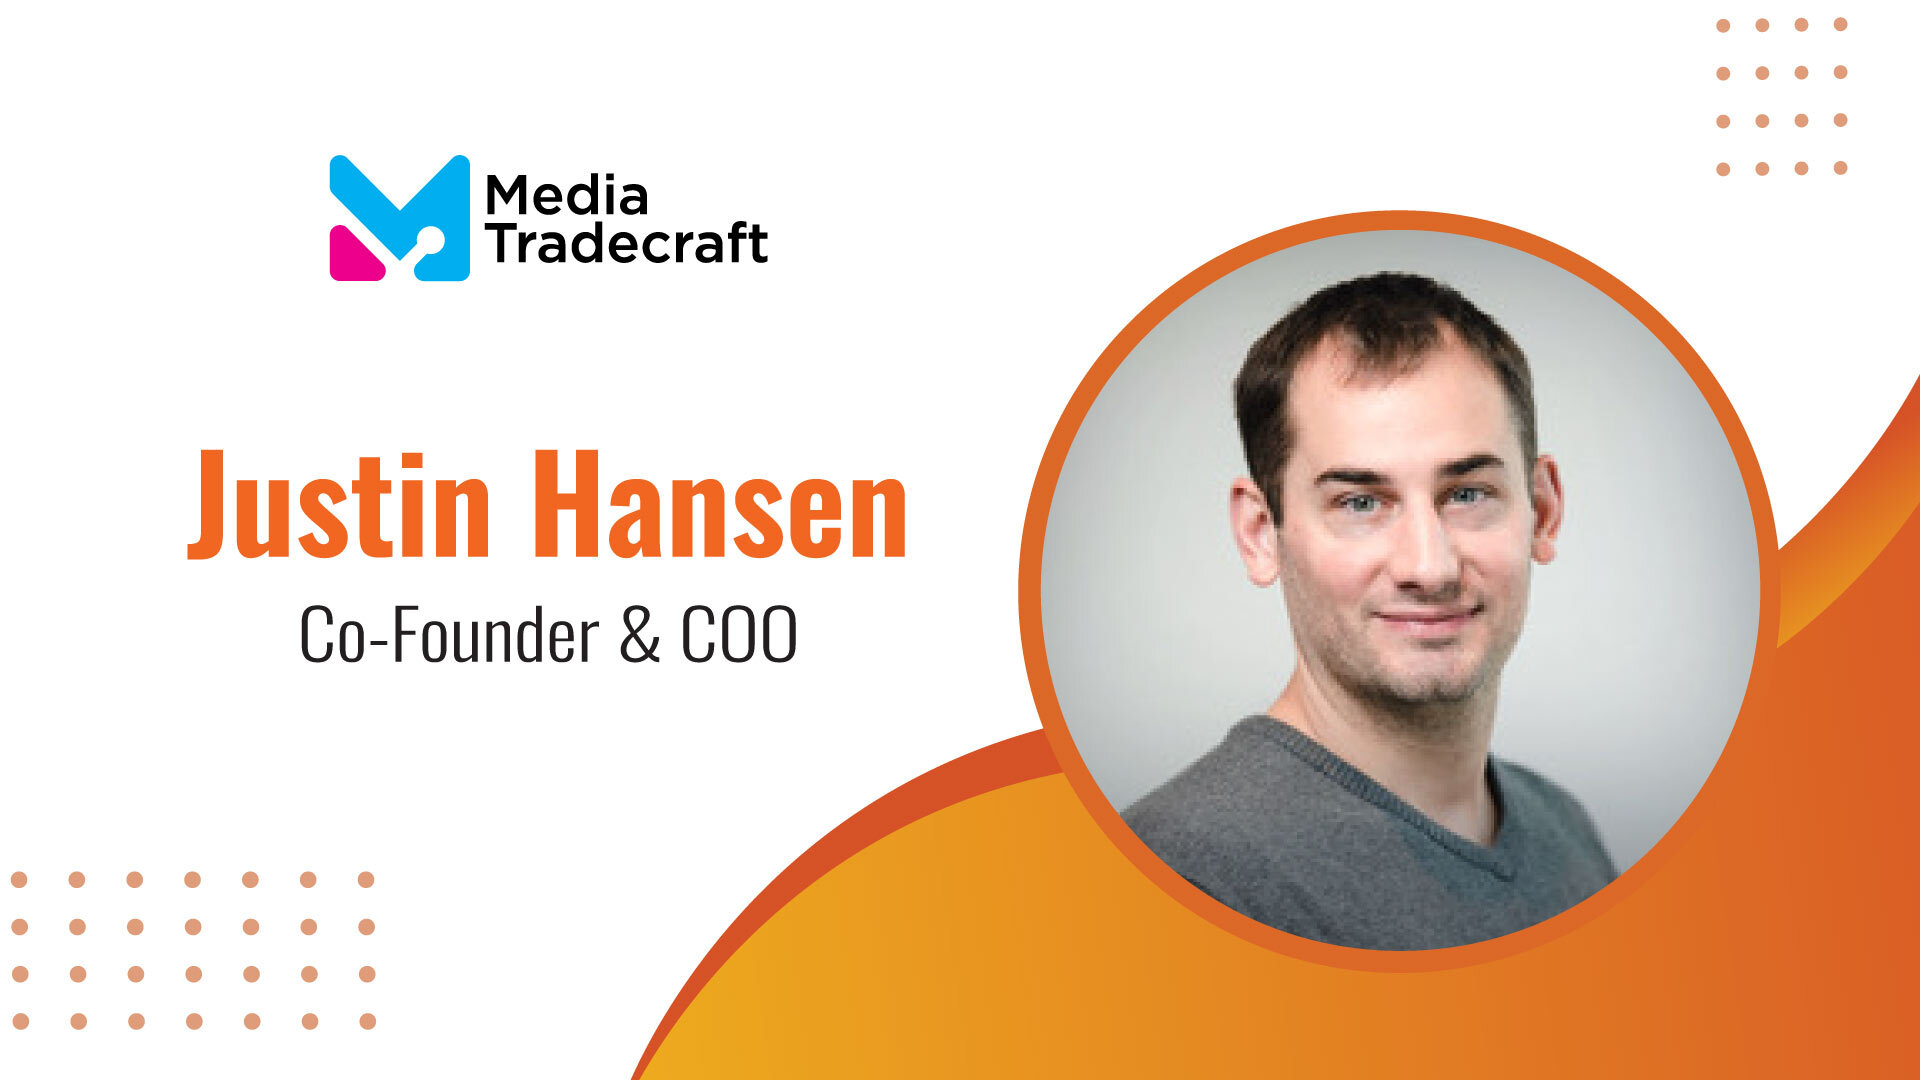  MarTech Edge Interview with Justin Hansen, Co-Founder & COO, Media Tradecraft